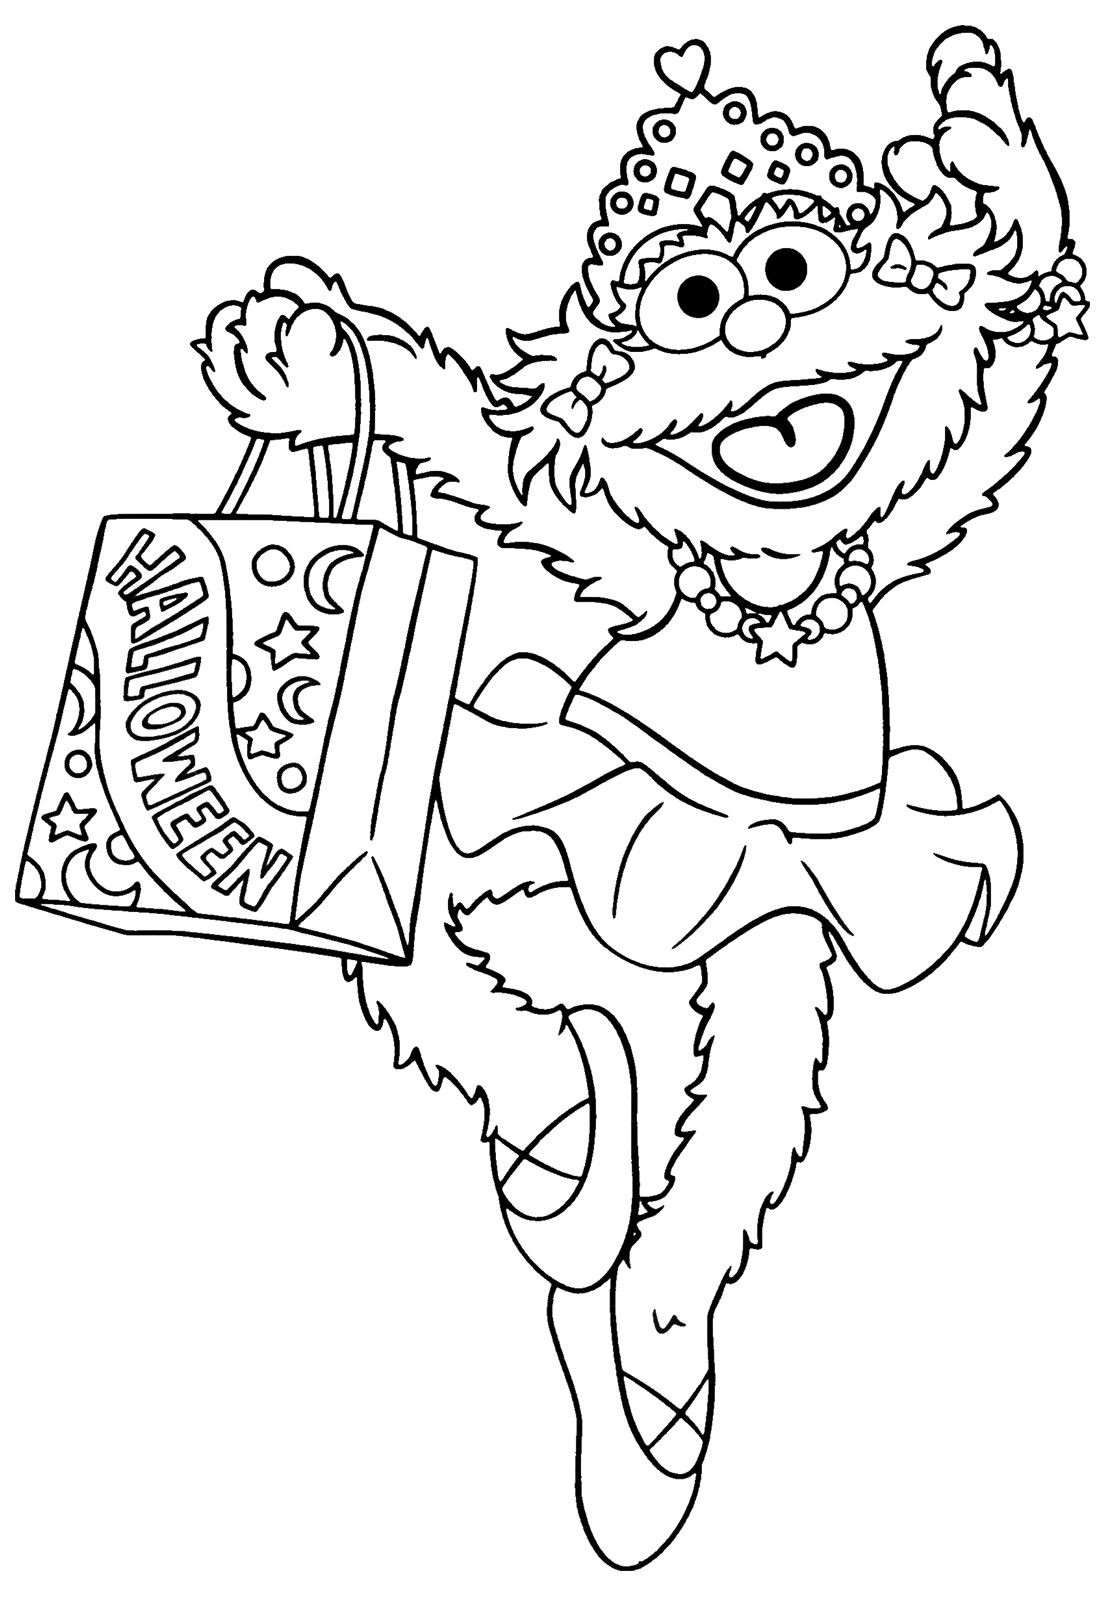 Coloring Pages For Girls Spelling Zoey
 coloring pages for girls spelling zoey